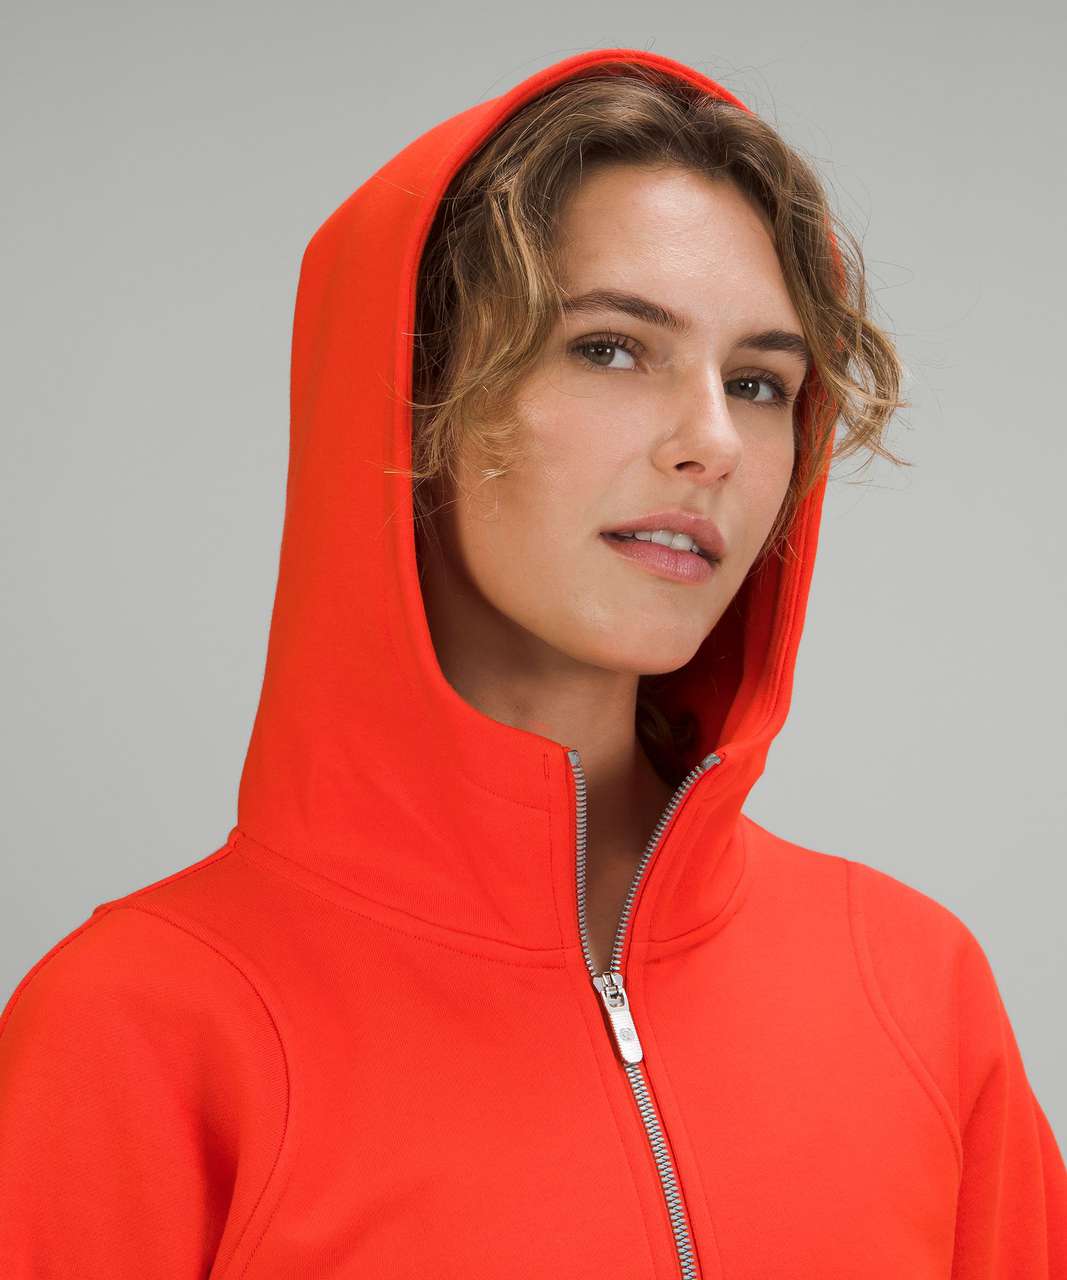 Lululemon Cotton French Terry Zip Hoodie - Autumn Red